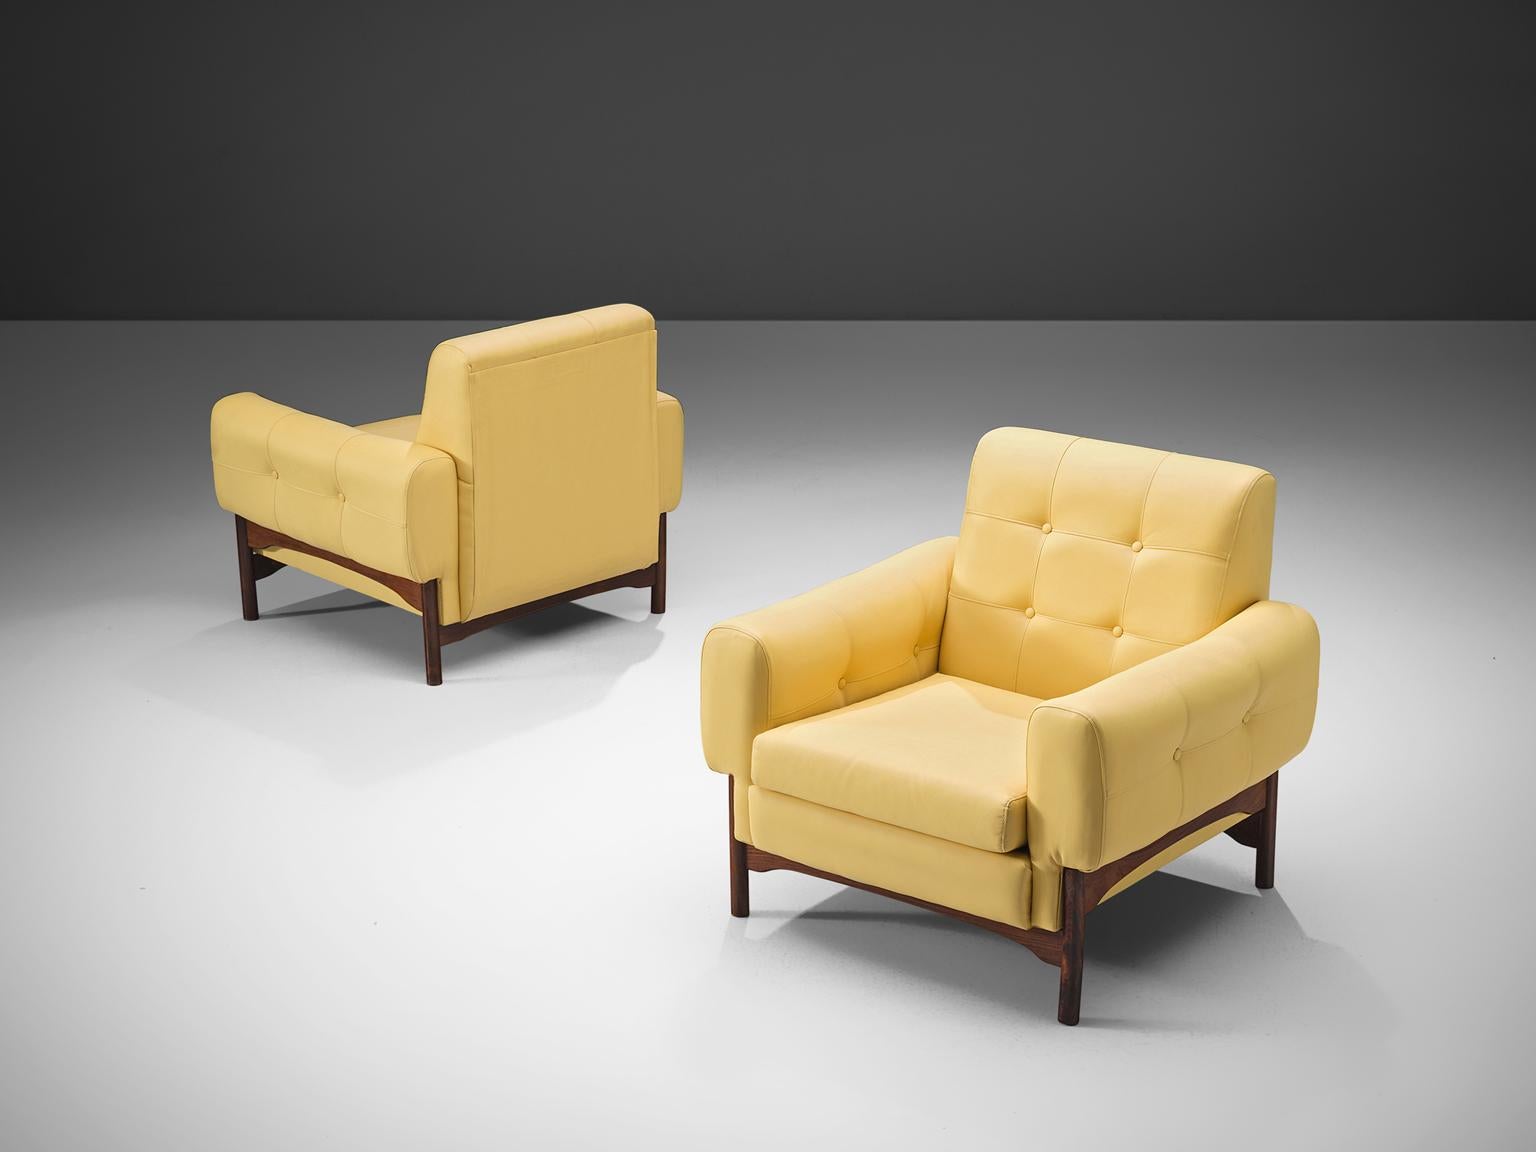 Pair of lounge chairs yellow faux leather upholstery, rosewood, Italy, 1960s.

This elegant, geometric pair of lounge chairs feature a mellow soft yellow faux leather upholstery. The chairs stand on four little tapered wooden legs that support the